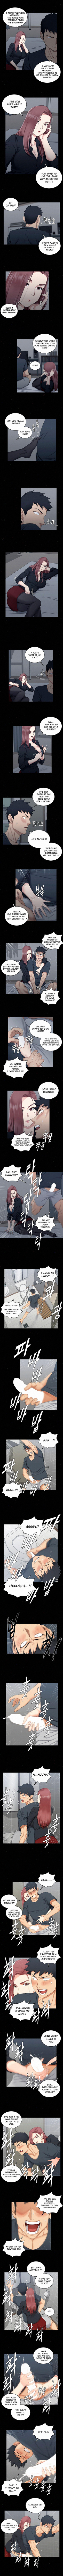 Read Manhwa his-place, Read Manga his-place Online